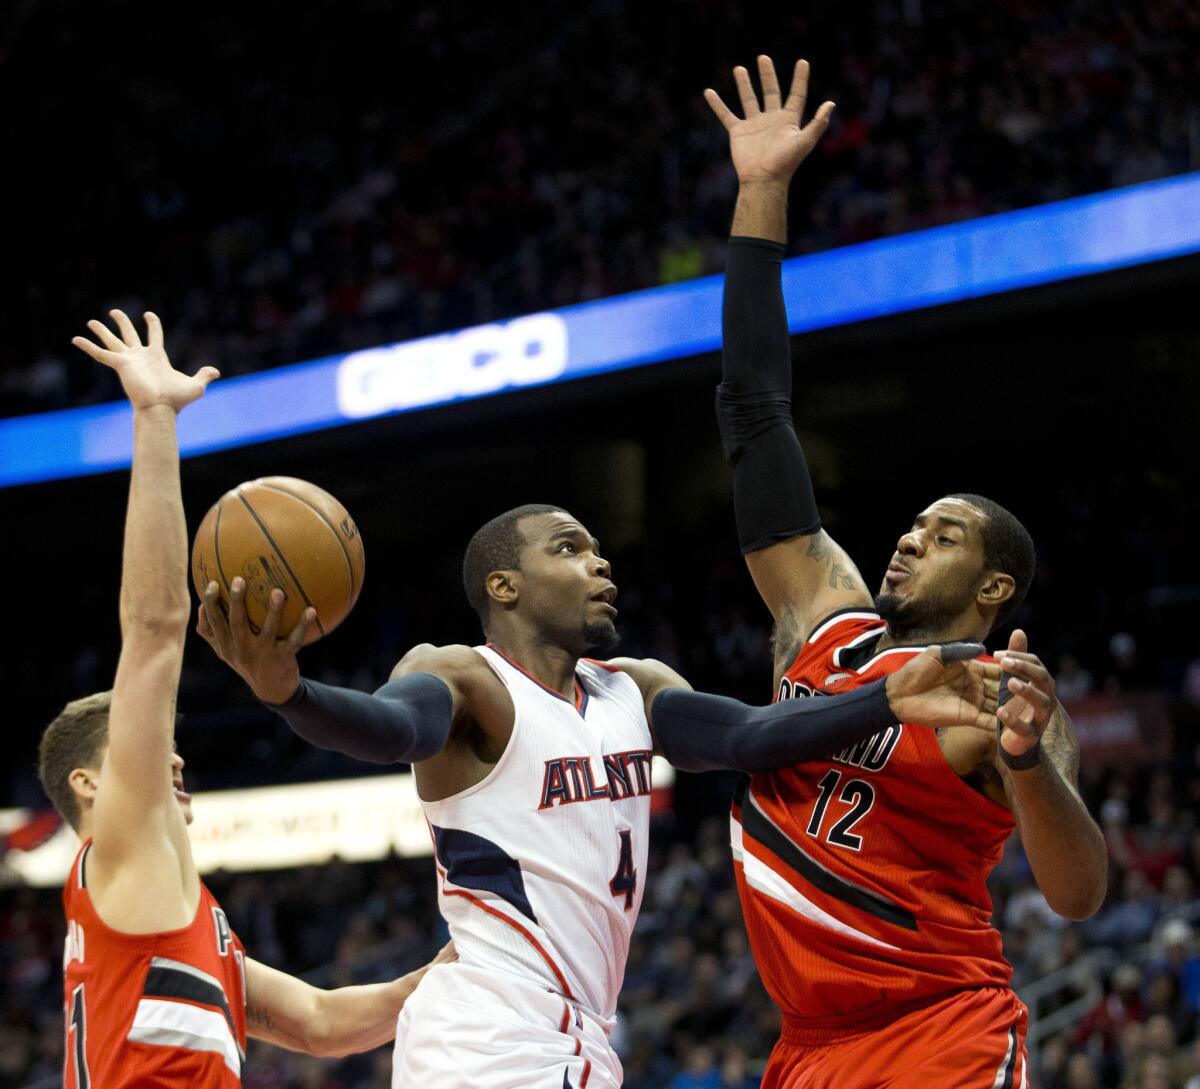 Atlanta;s Paul Millsap goes up for a basket against Portland's LaMarcus Aldridge during the first half of a game Jan. 30.